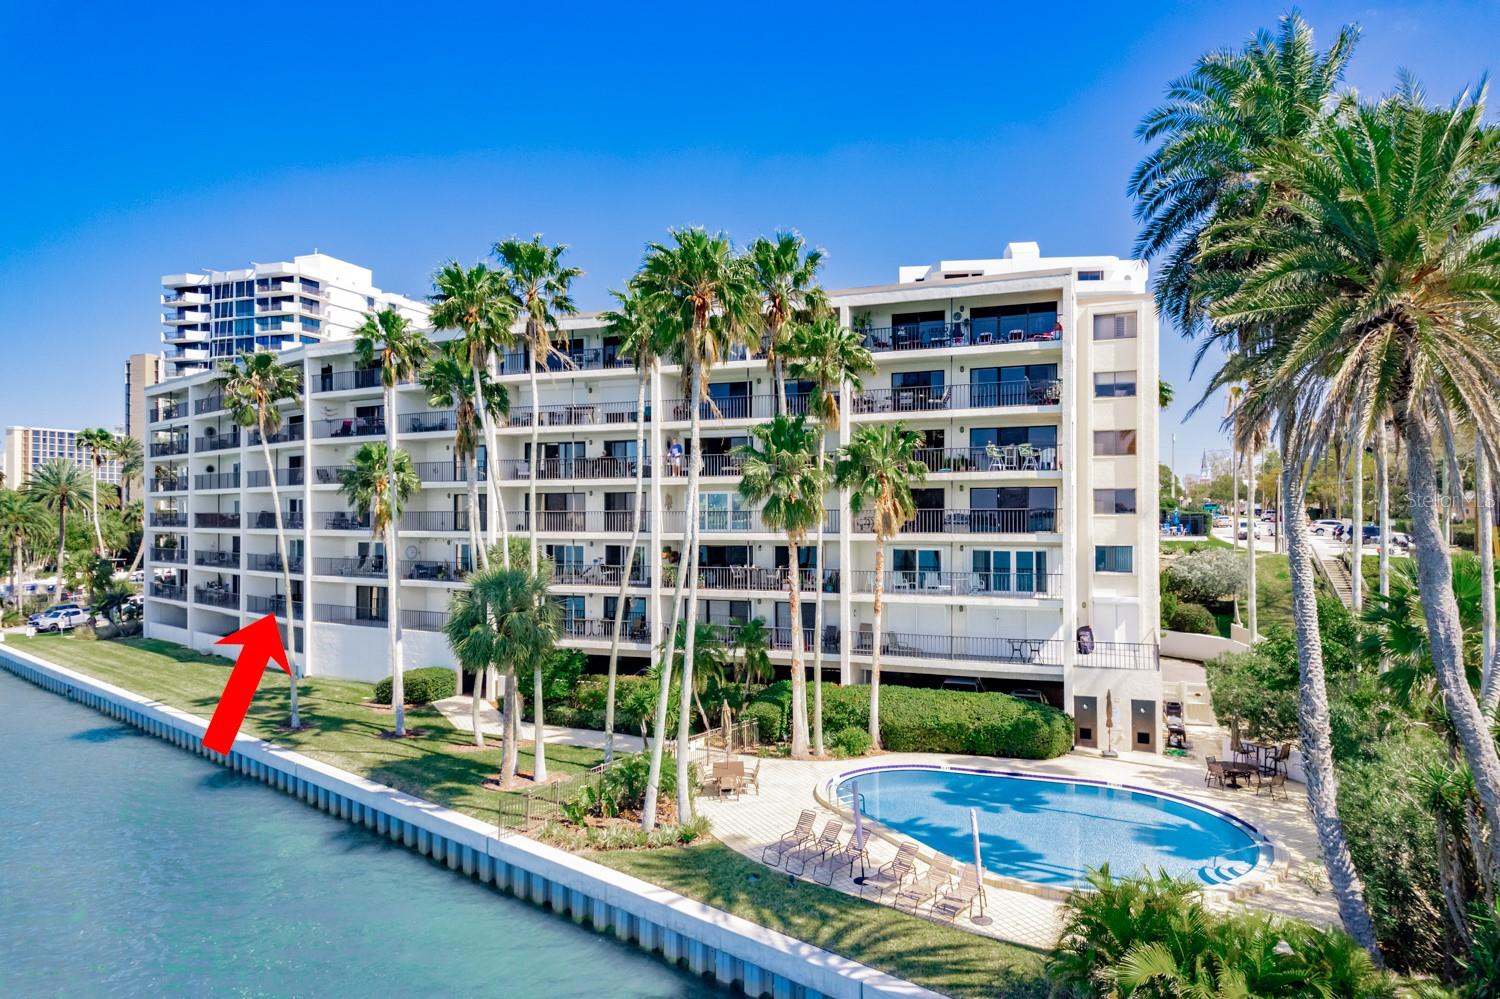 Nestled in a private and secluded haven just minutes away from the pristine shores of Clearwater Beach